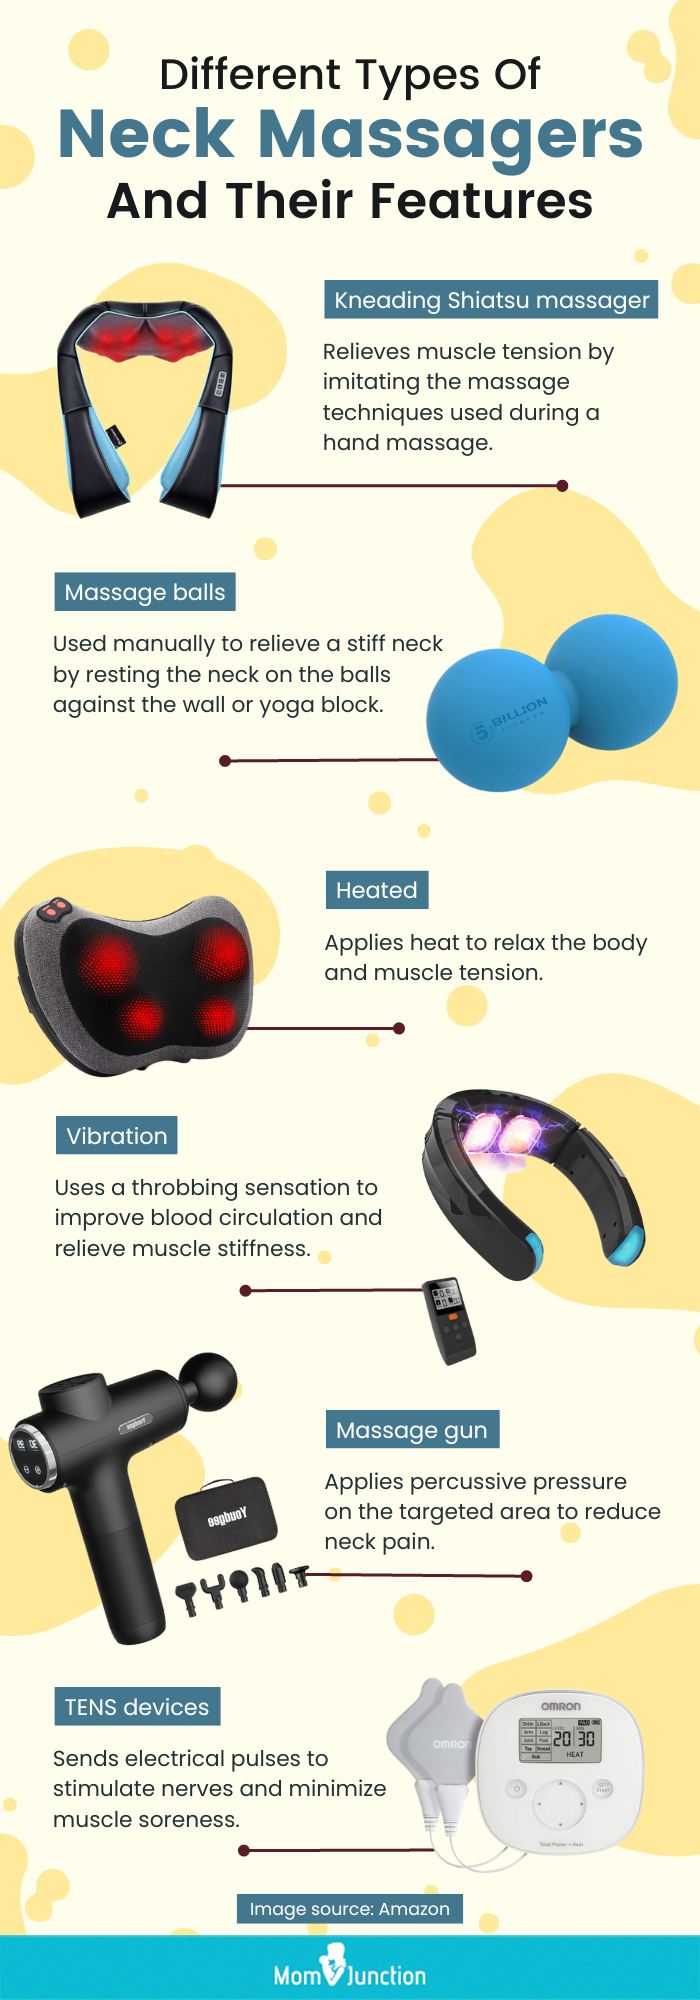 What are the best neck and shoulder massagers? - Quora